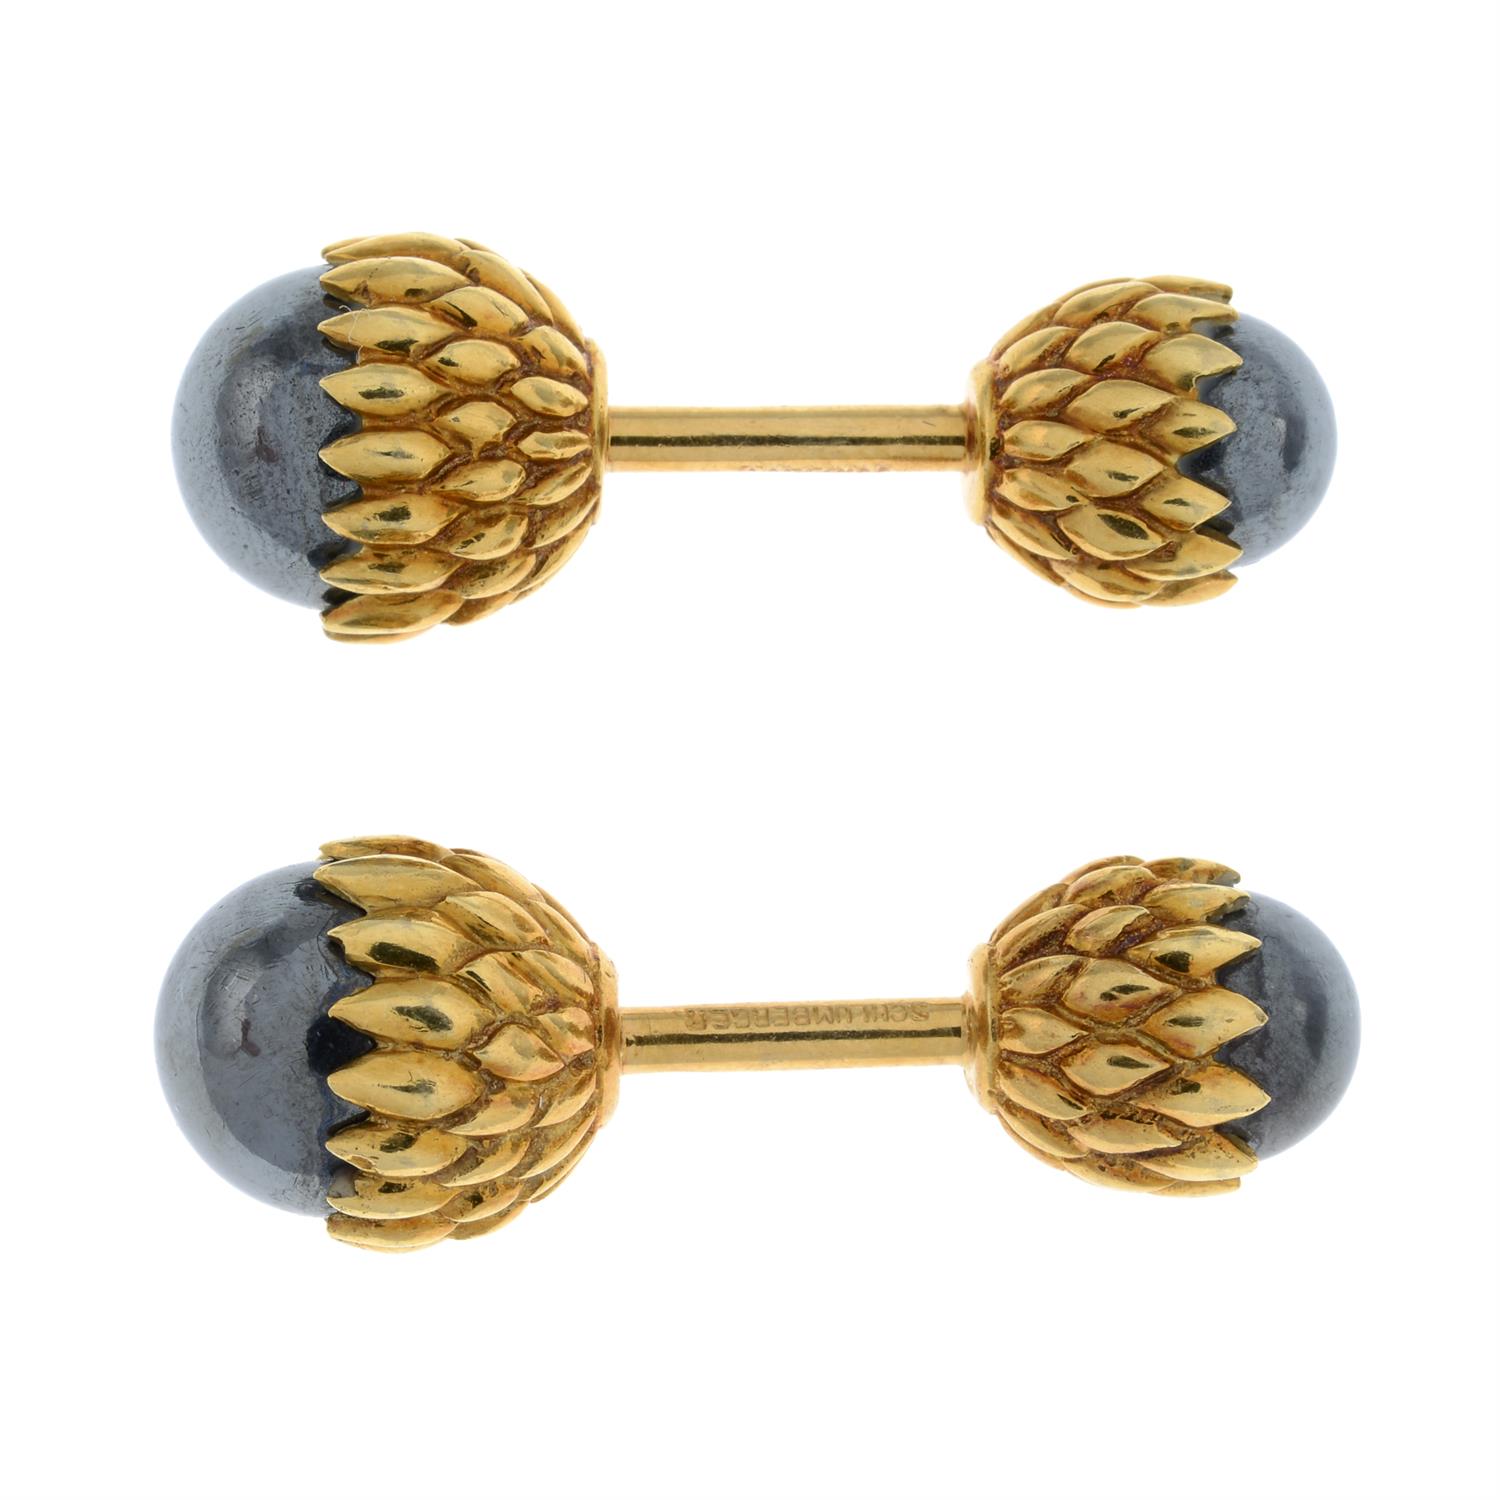 Cufflinks, by Schlumberger, for Tiffany & Co. - Image 2 of 4